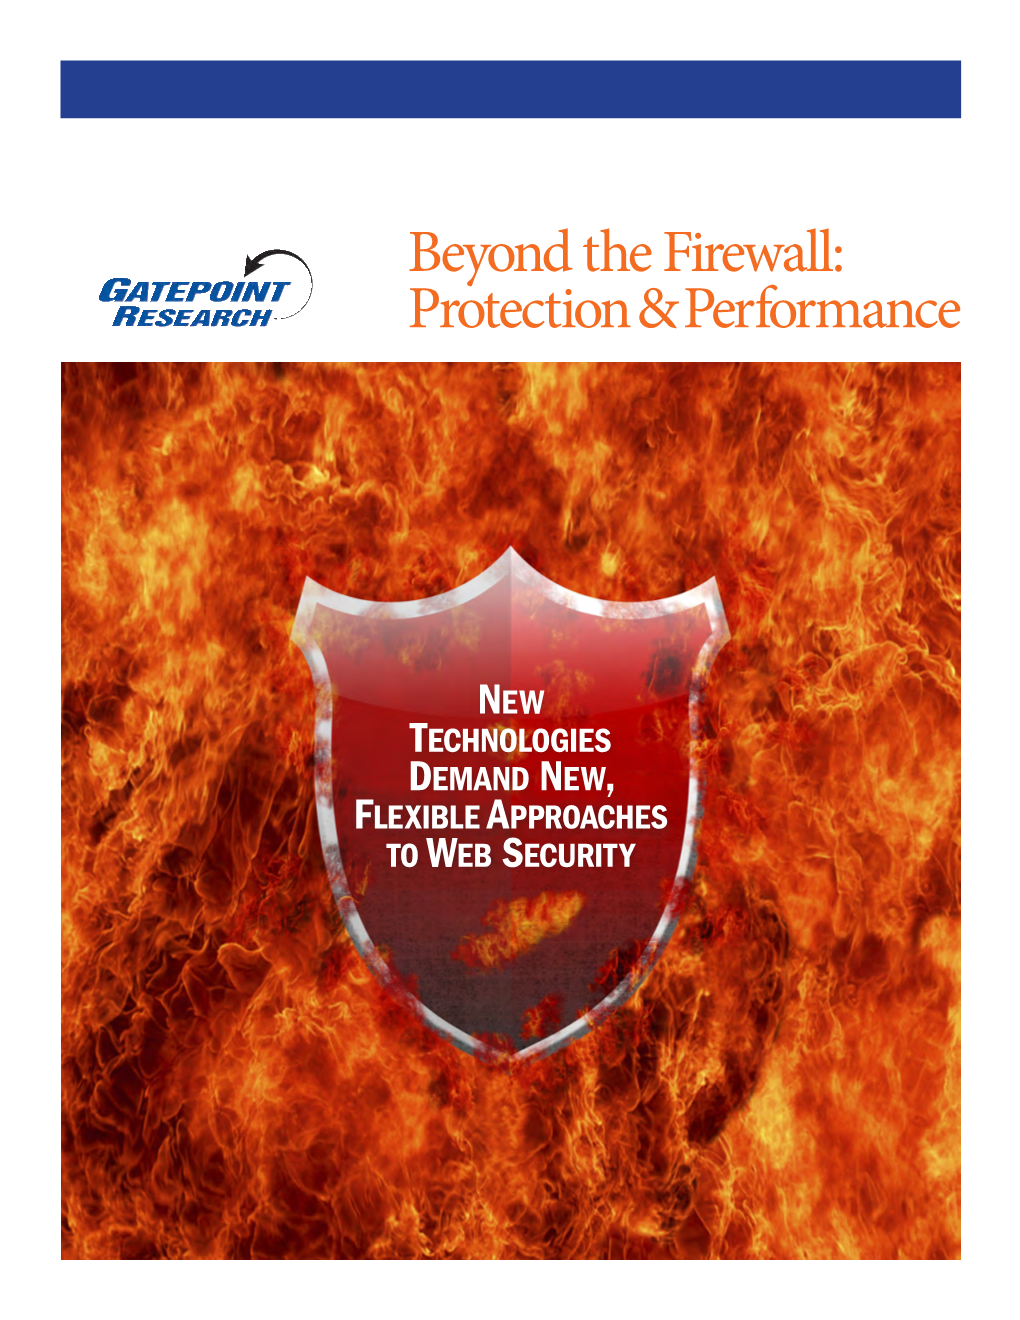 Beyond the Firewall: Protection & Performance